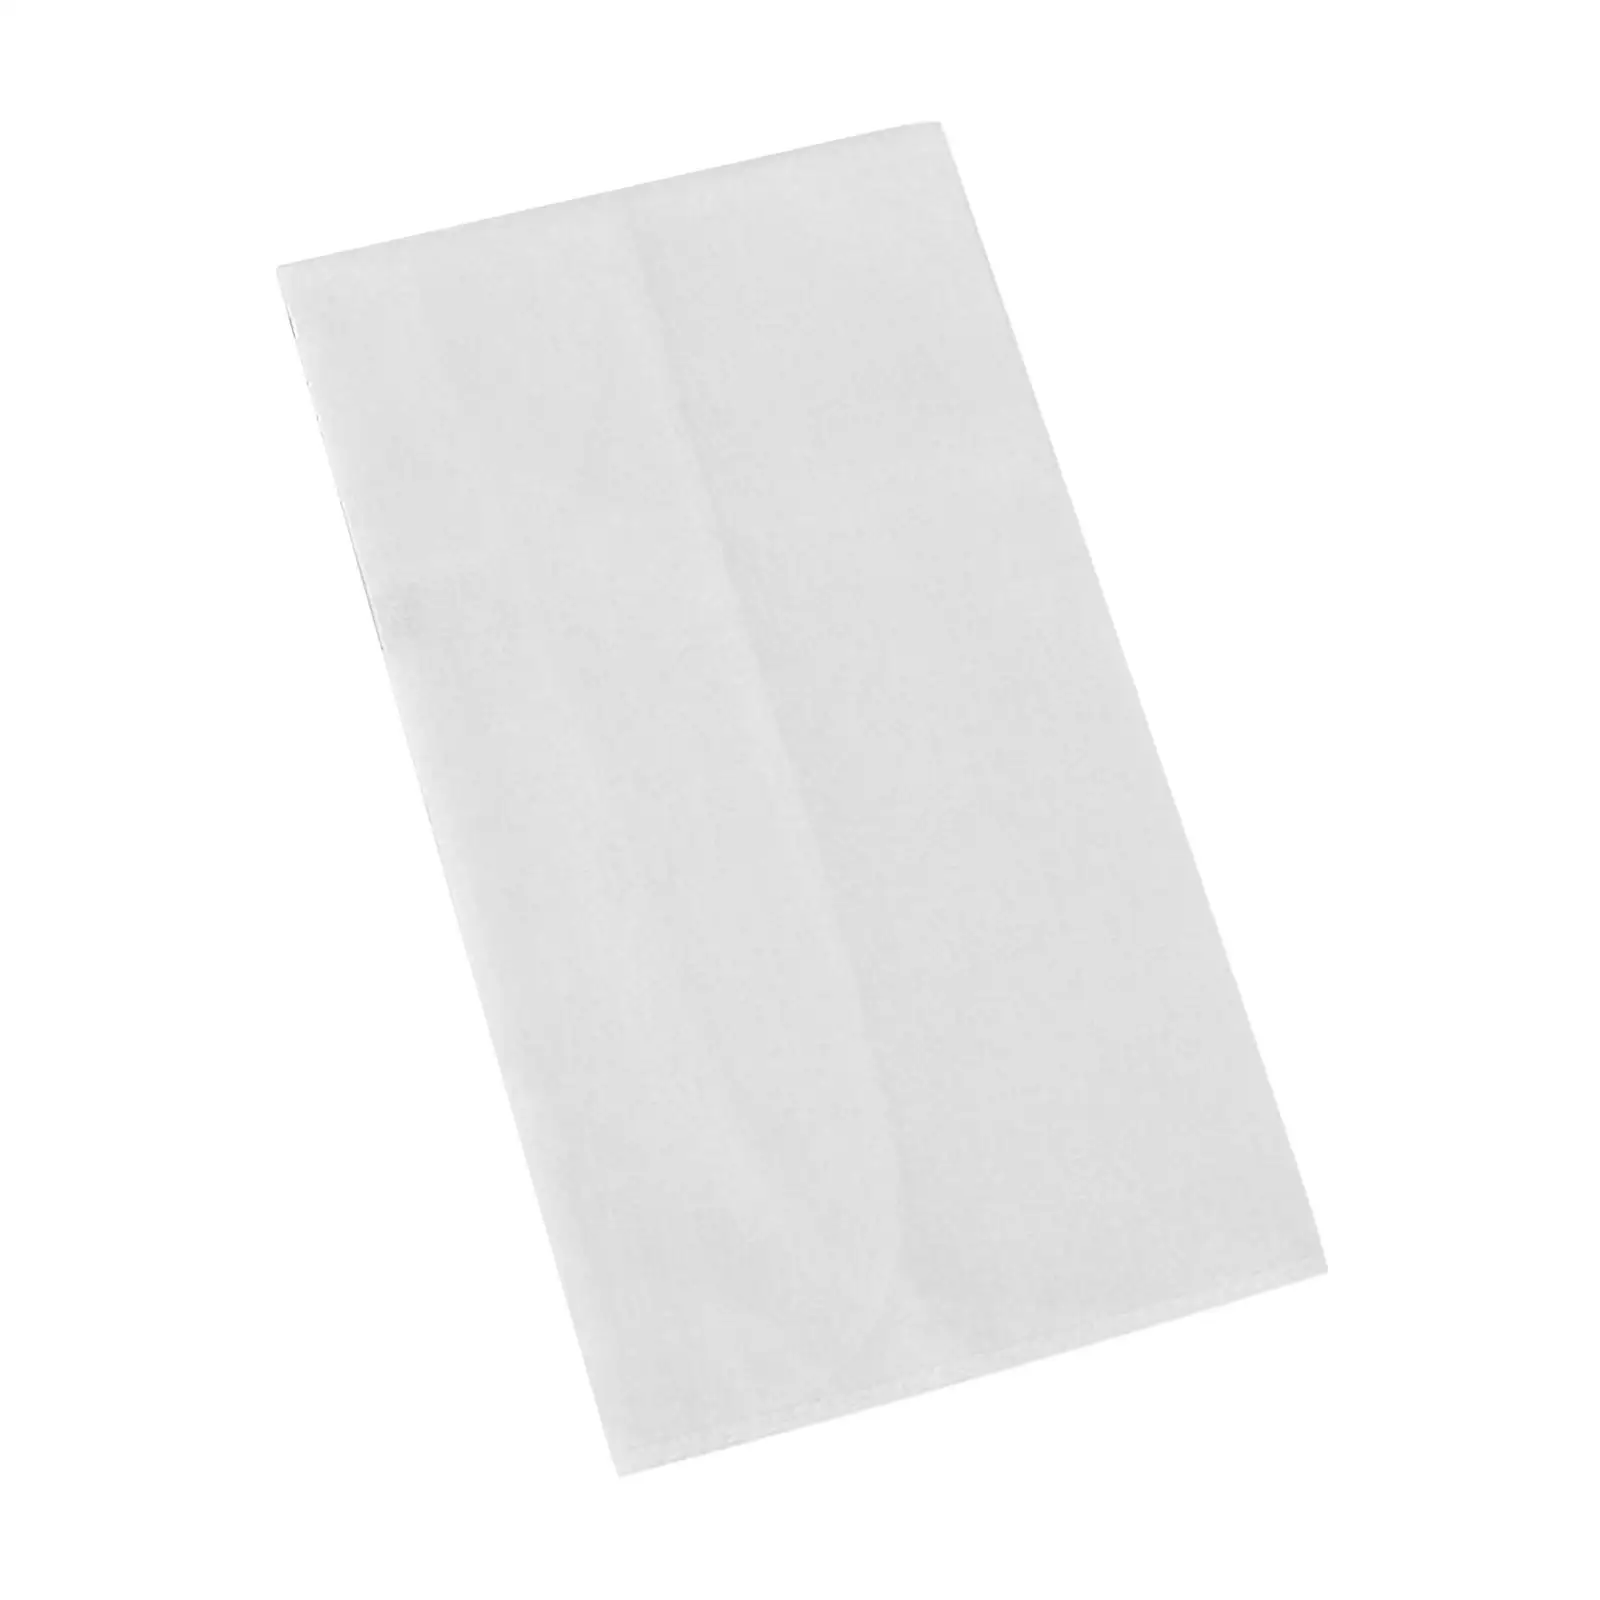 

Steamer Liner Home Breathable Food Filter Cloth Cheese Cloth 32cm Steamer Baking Cloth for Steaming Dumplings Buns Pastry Bread